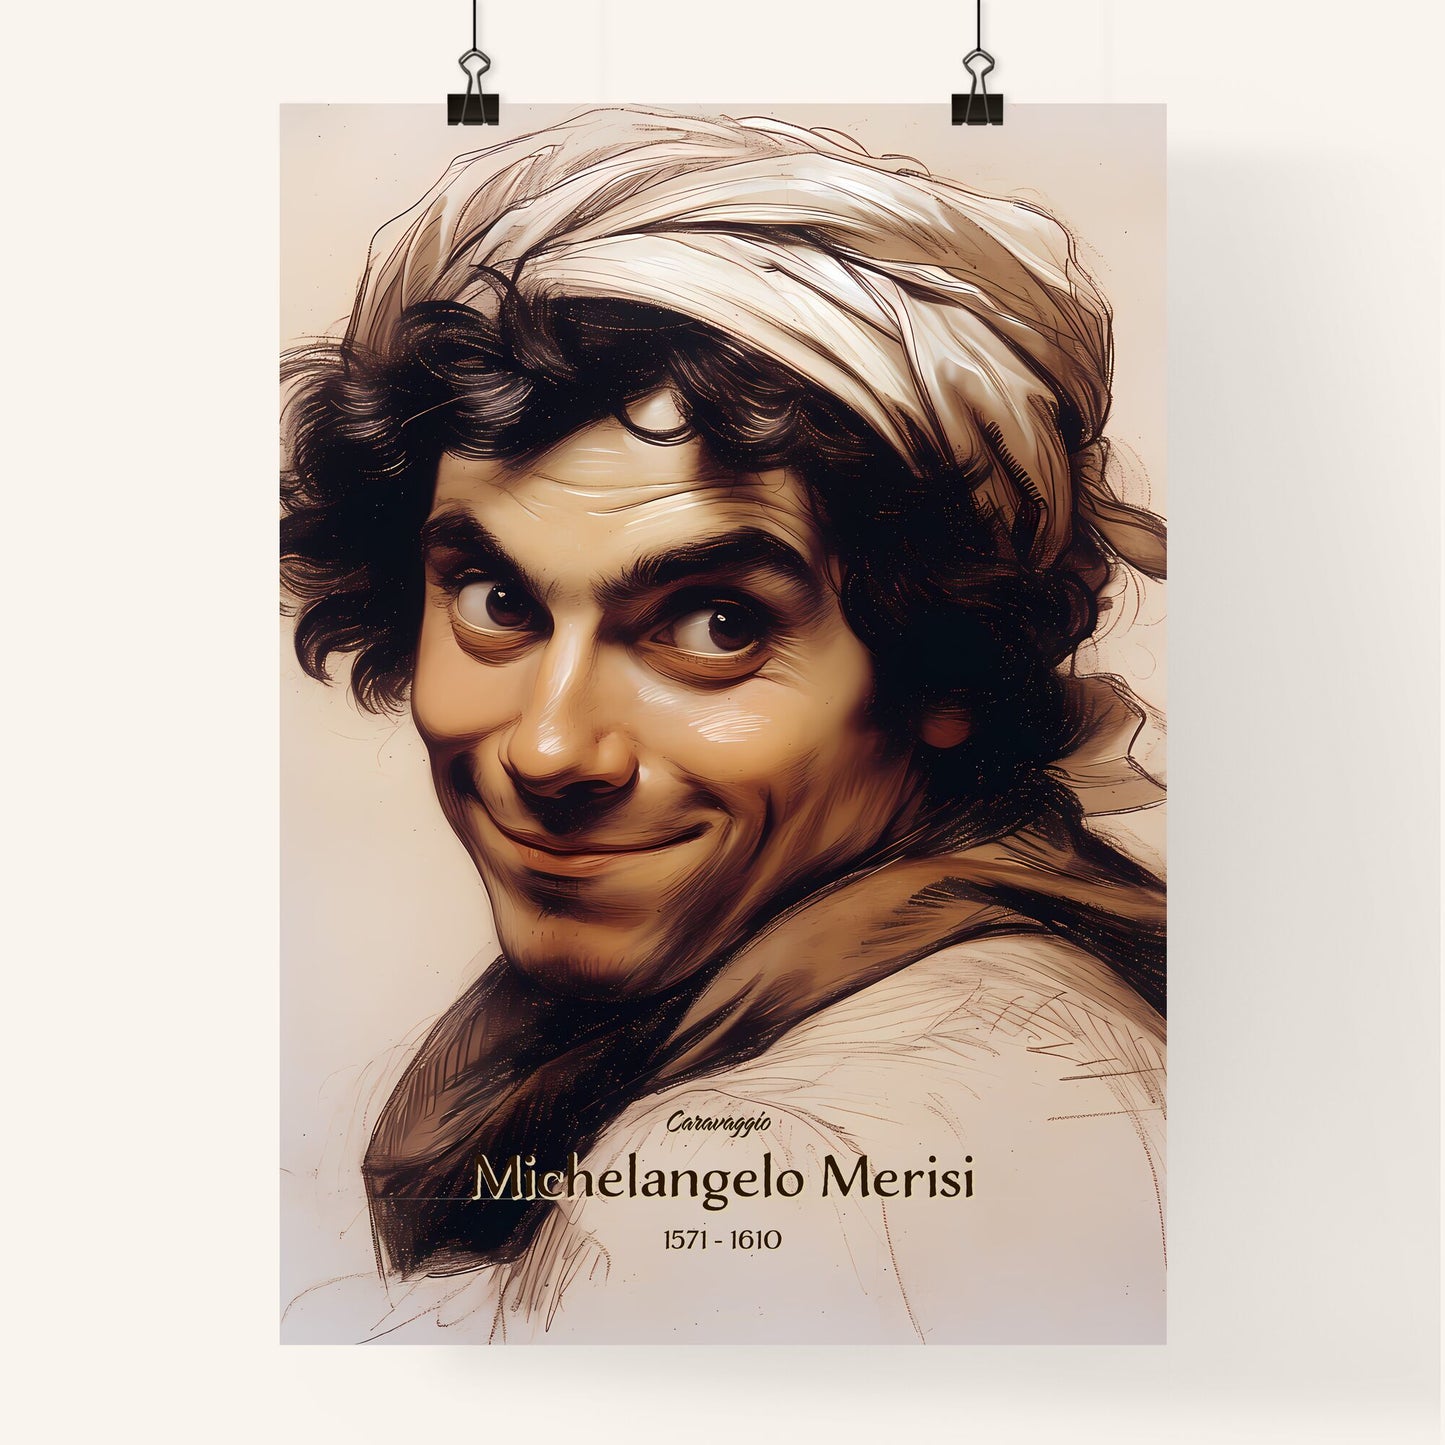 Caravaggio, Michelangelo Merisi, 1571 - 1610, A Poster of a man with a scarf on his head Default Title